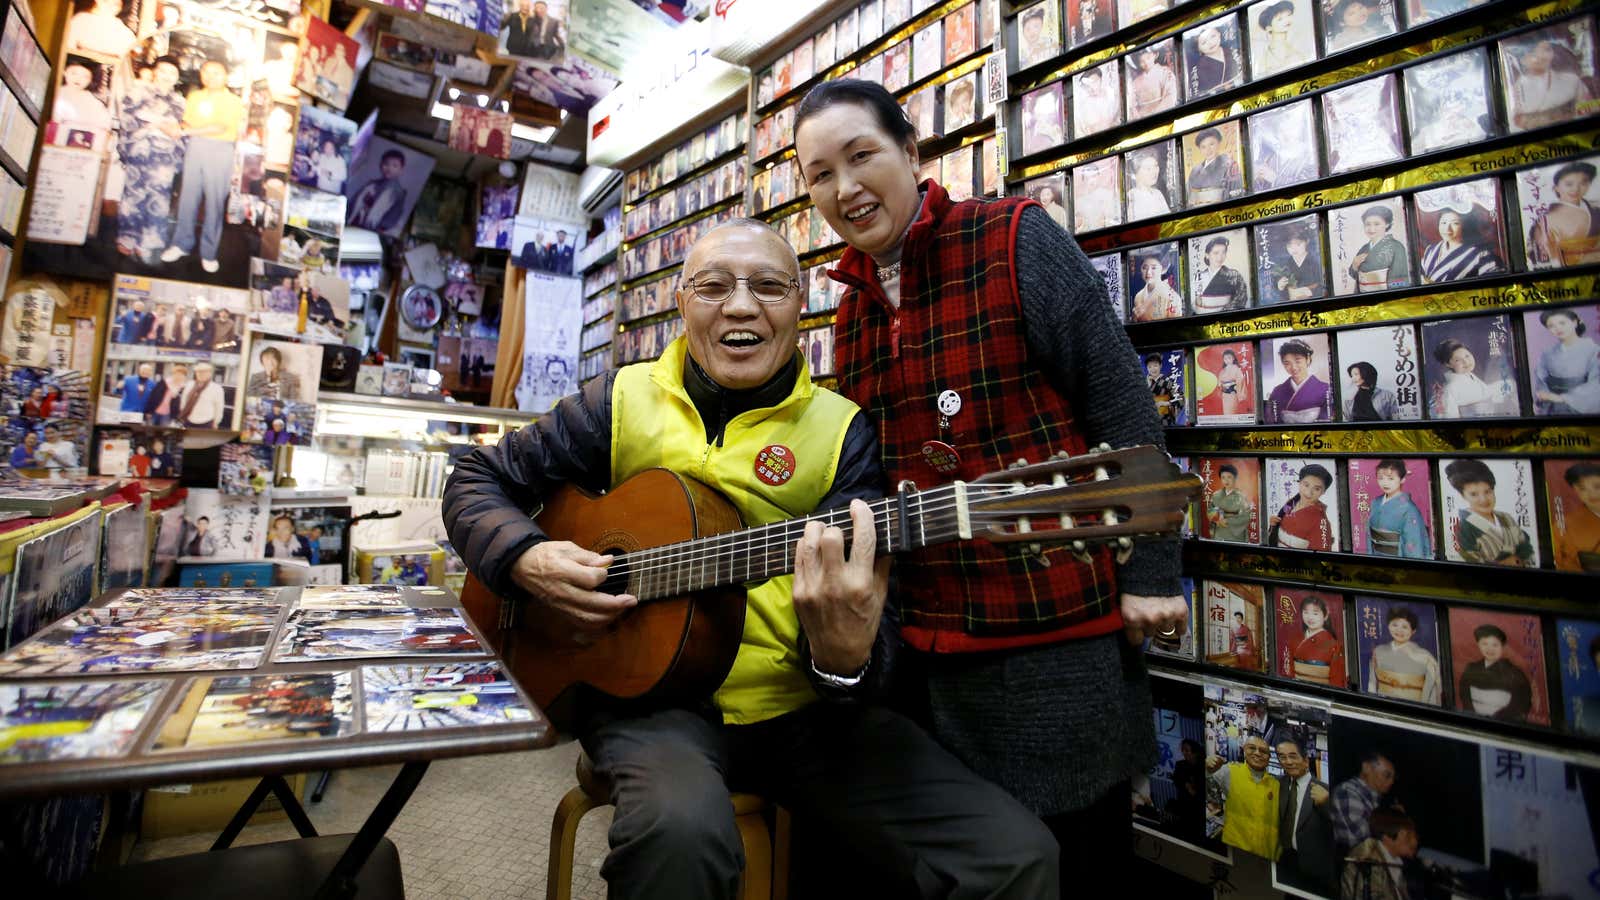 Kazuhiko Kobayashi, 80, and his wife Mieko Kobayashi, 73, pose for a photograph at their music shop named Ameyoko Rhythm, specialised for Enka, traditional Japanese popular ballad, in Tokyo’s Ameyoko shopping district, Japan, February 8, 2018. “I met her in 1963, 55 years ago. She was a classmate of my younger sister. One day she came over to my house and I took a shine to her because she was so charming. Since that day on, I called her every day. In the beginning, she did not seem to be interested in me, but I conveyed my passion to her. On our first date, I waited at a meeting place for an hour. It turned out she had been advised by her mother and older sister to be late for an hour to see whether I was serious about her. My feelings got through to her, and we married on October 15, 1964, five days after the opening ceremony of the Tokyo Olympics. Fifty four years have passed since then. We see each other most of the time, both at home and at this shop, which has been in business for about 50 years, but I still find her charming every day!” said Kazuhiko. REUTERS/Toru Hanai          SEARCH “GLOBAL LOVE” FOR THIS STORY. SEARCH “WIDER IMAGE” FOR ALL STORIES. – RC15DD1008E0